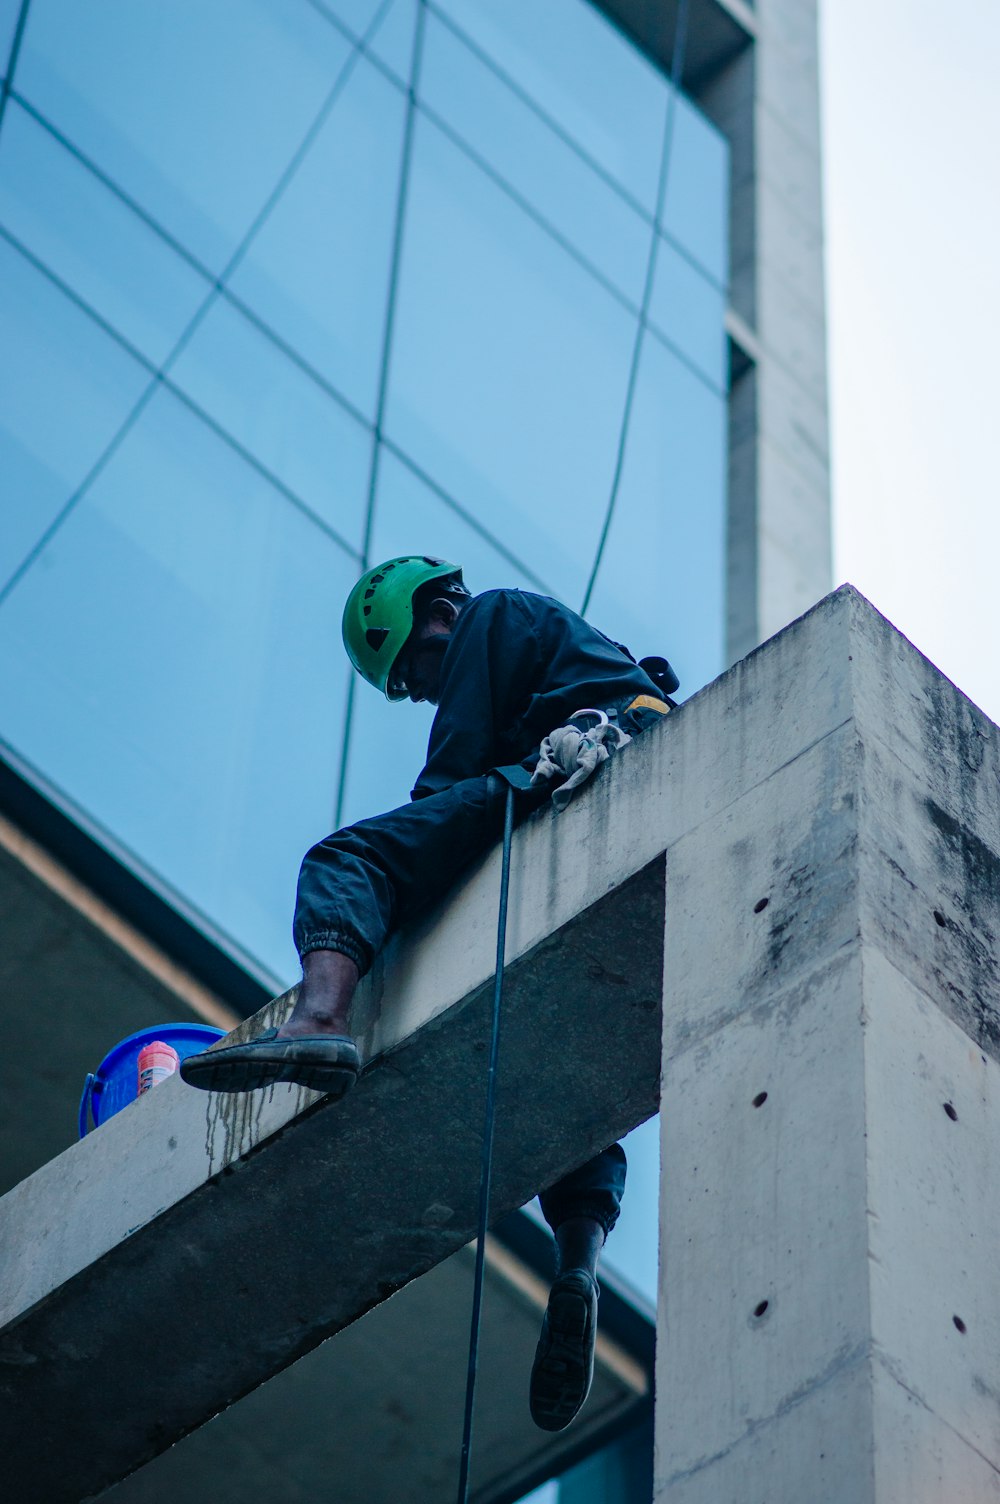 a man in a green helmet is climbing up the side of a building